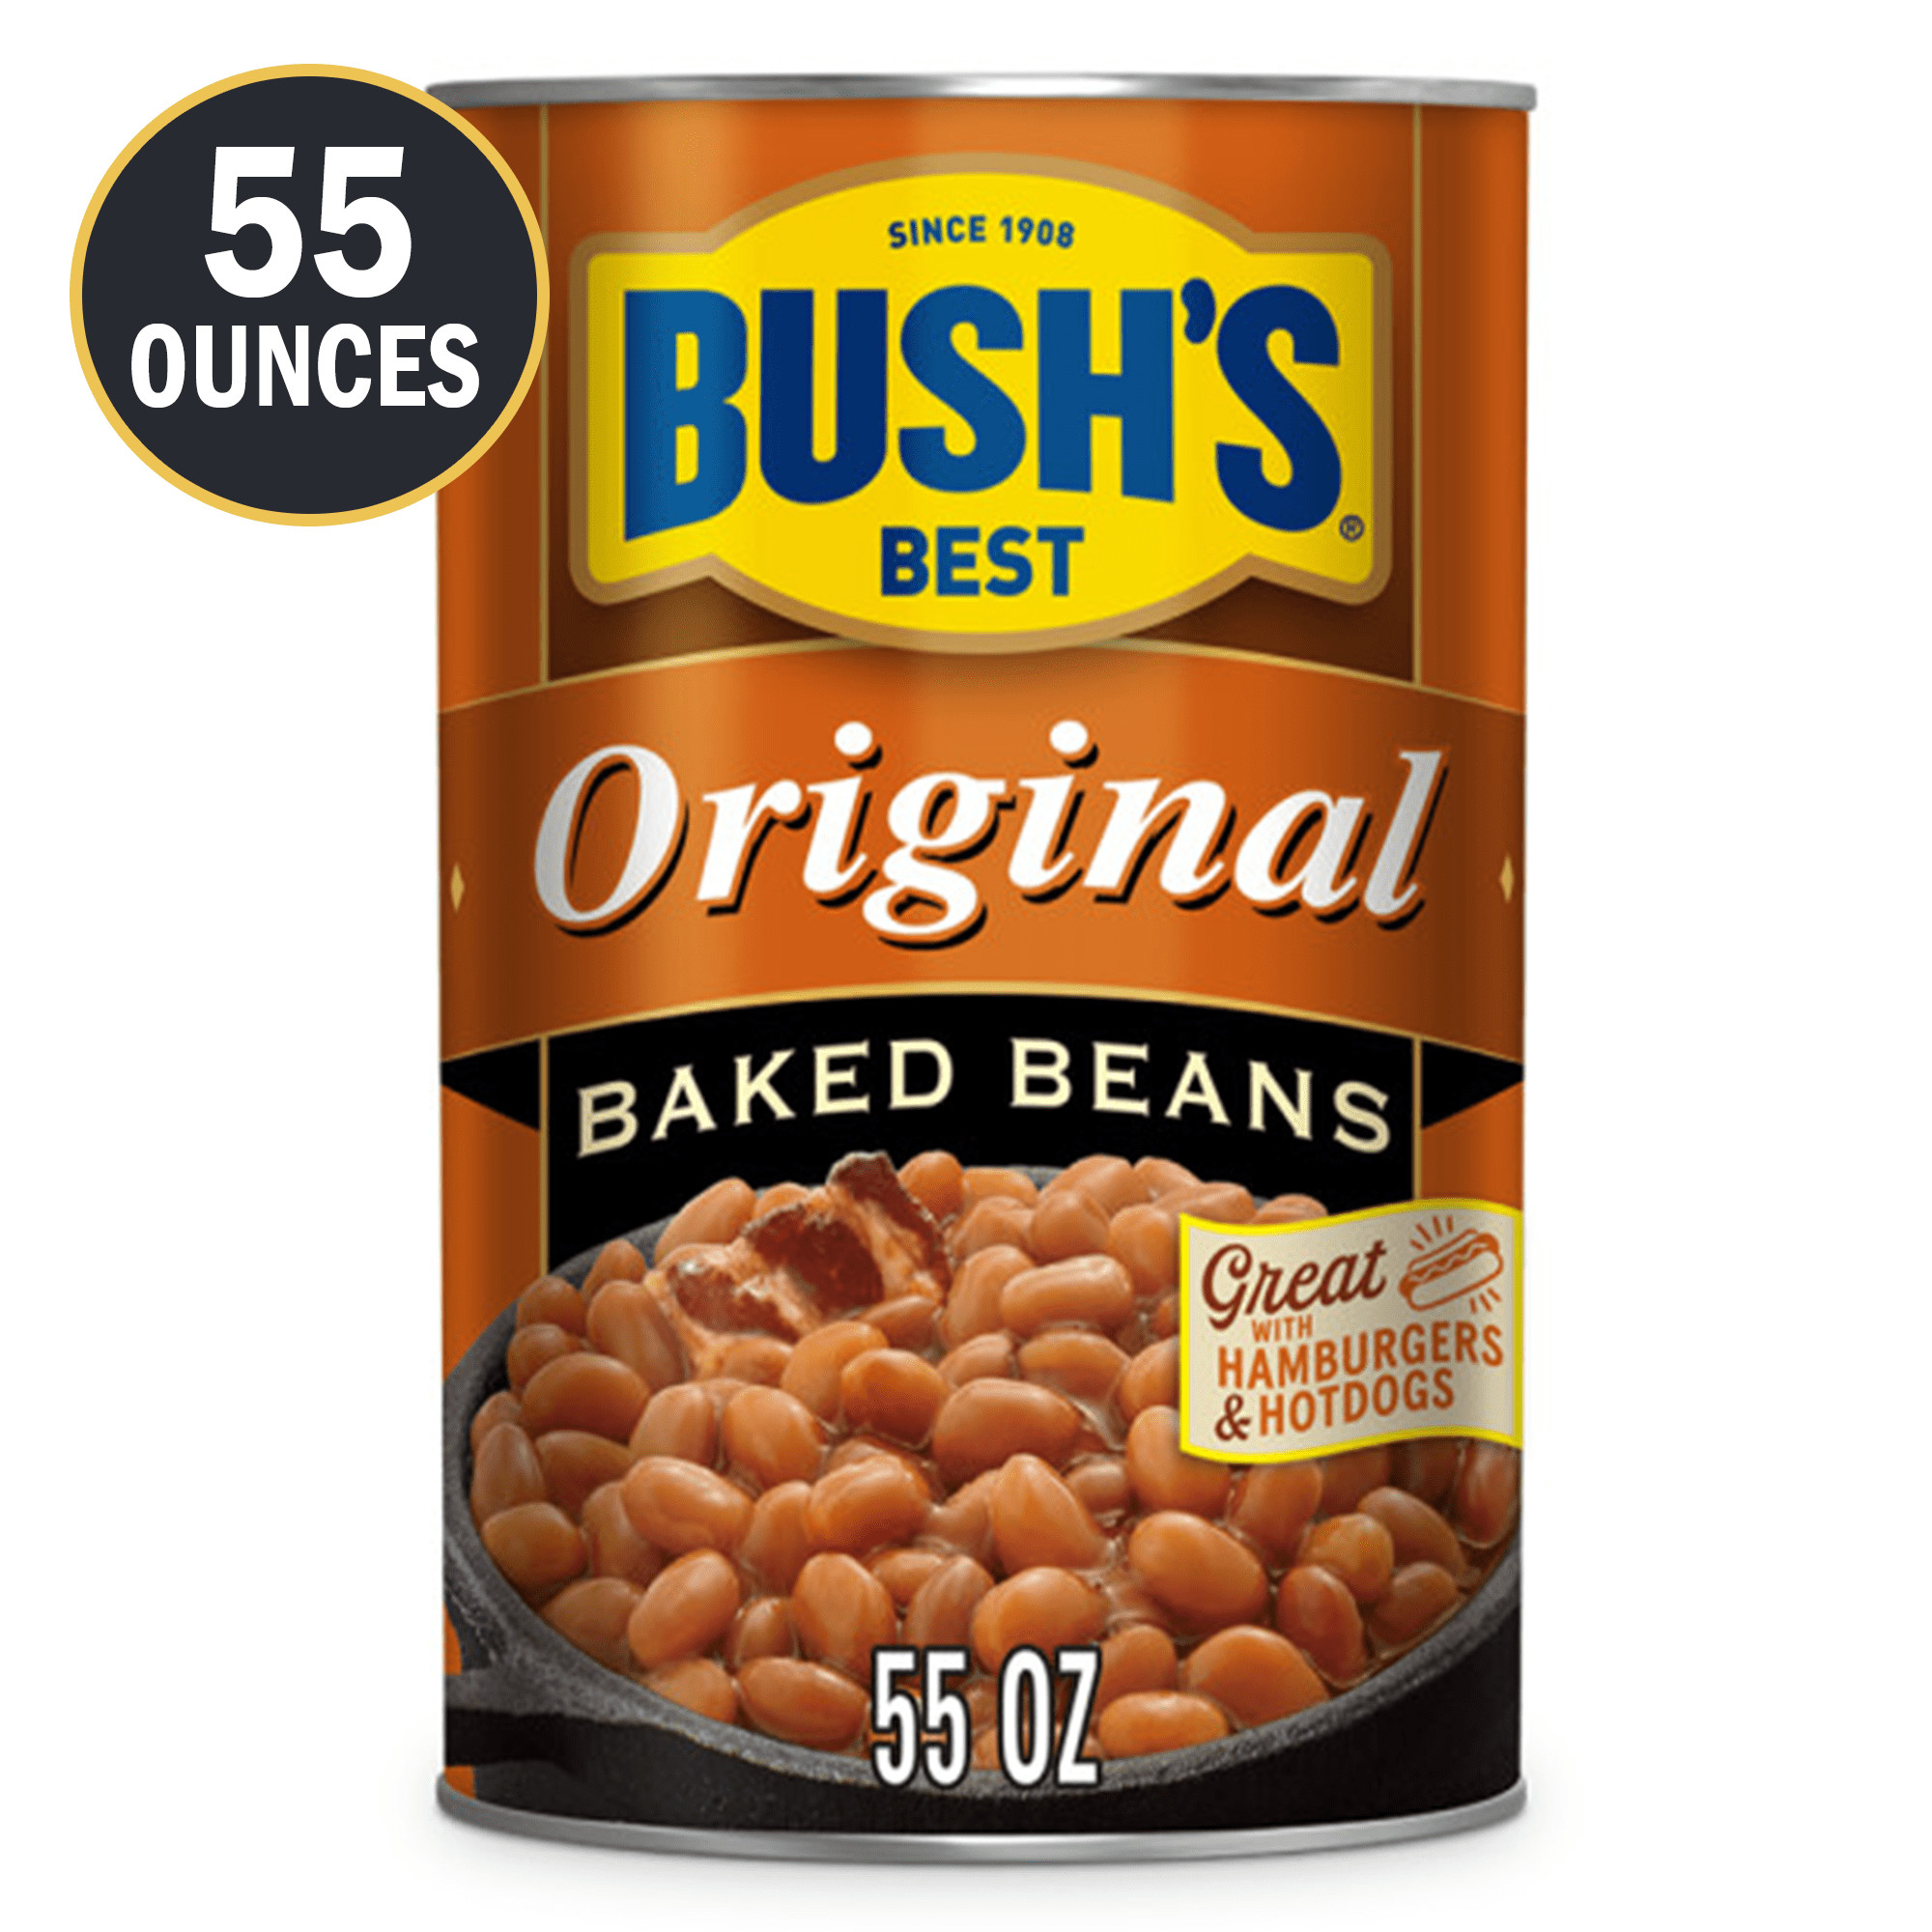 Bush's Original Baked Beans Seasoned with Bacon & Brown Sugar, Canned Beans, 55 oz - image 1 of 7